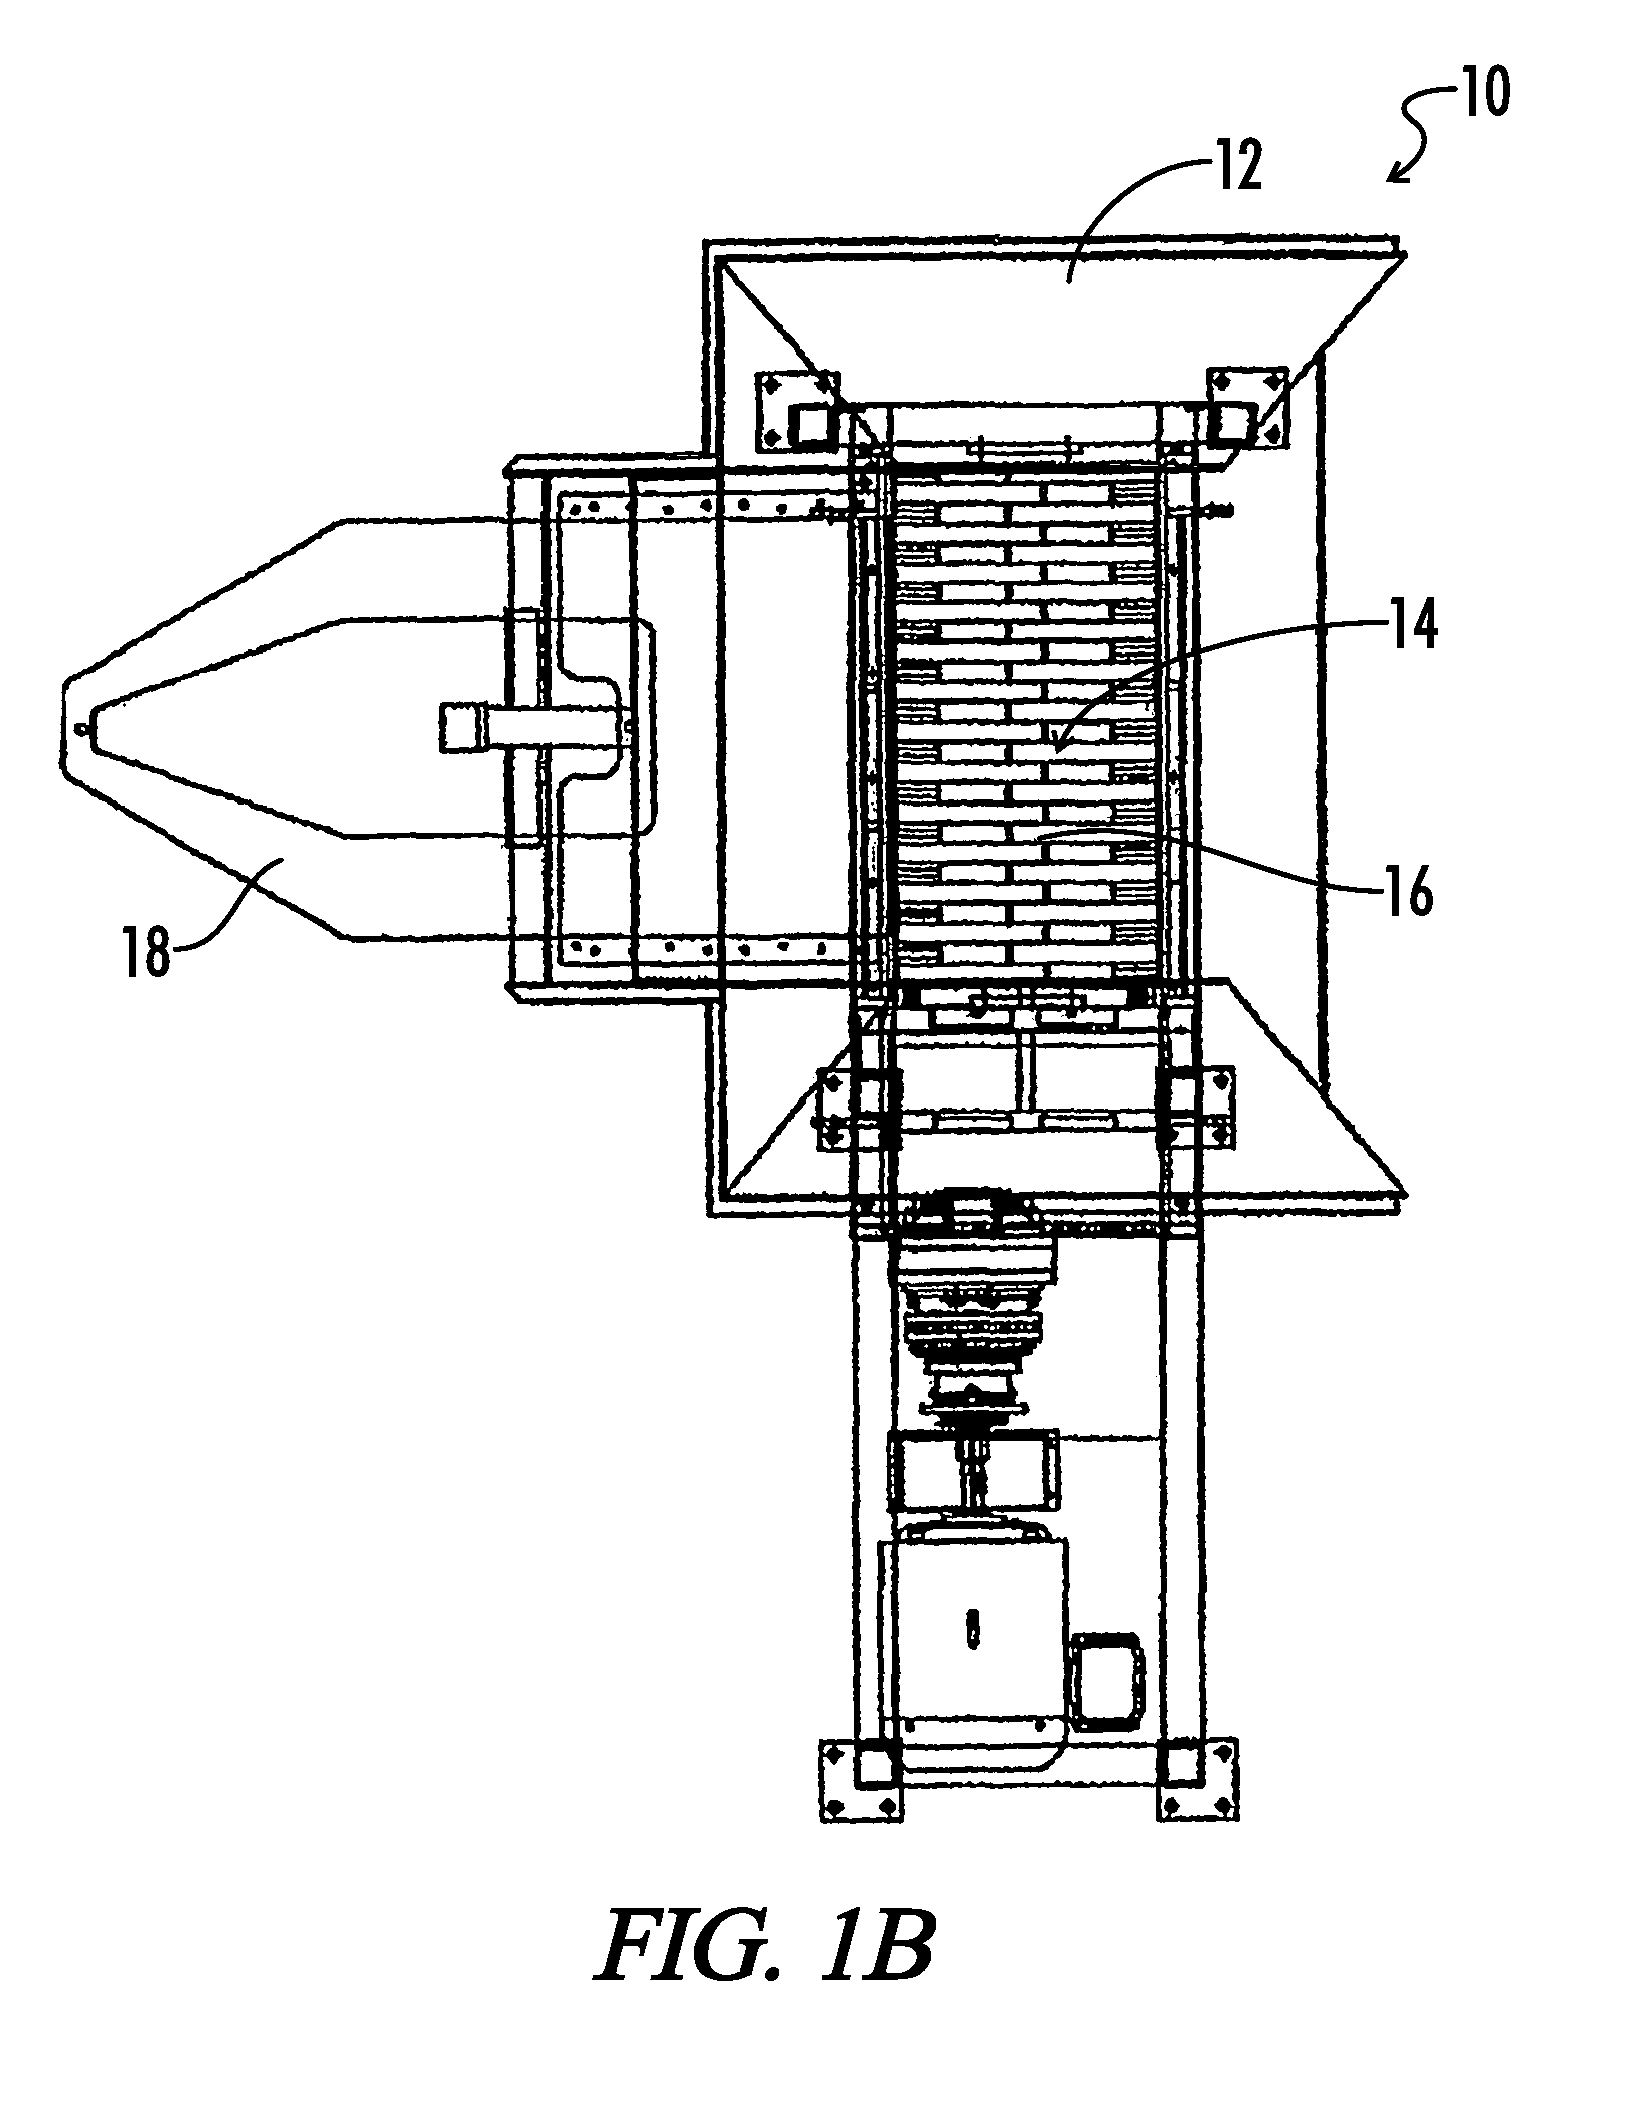 Apparatus and Method for Transforming Solid Waste into Useful Products